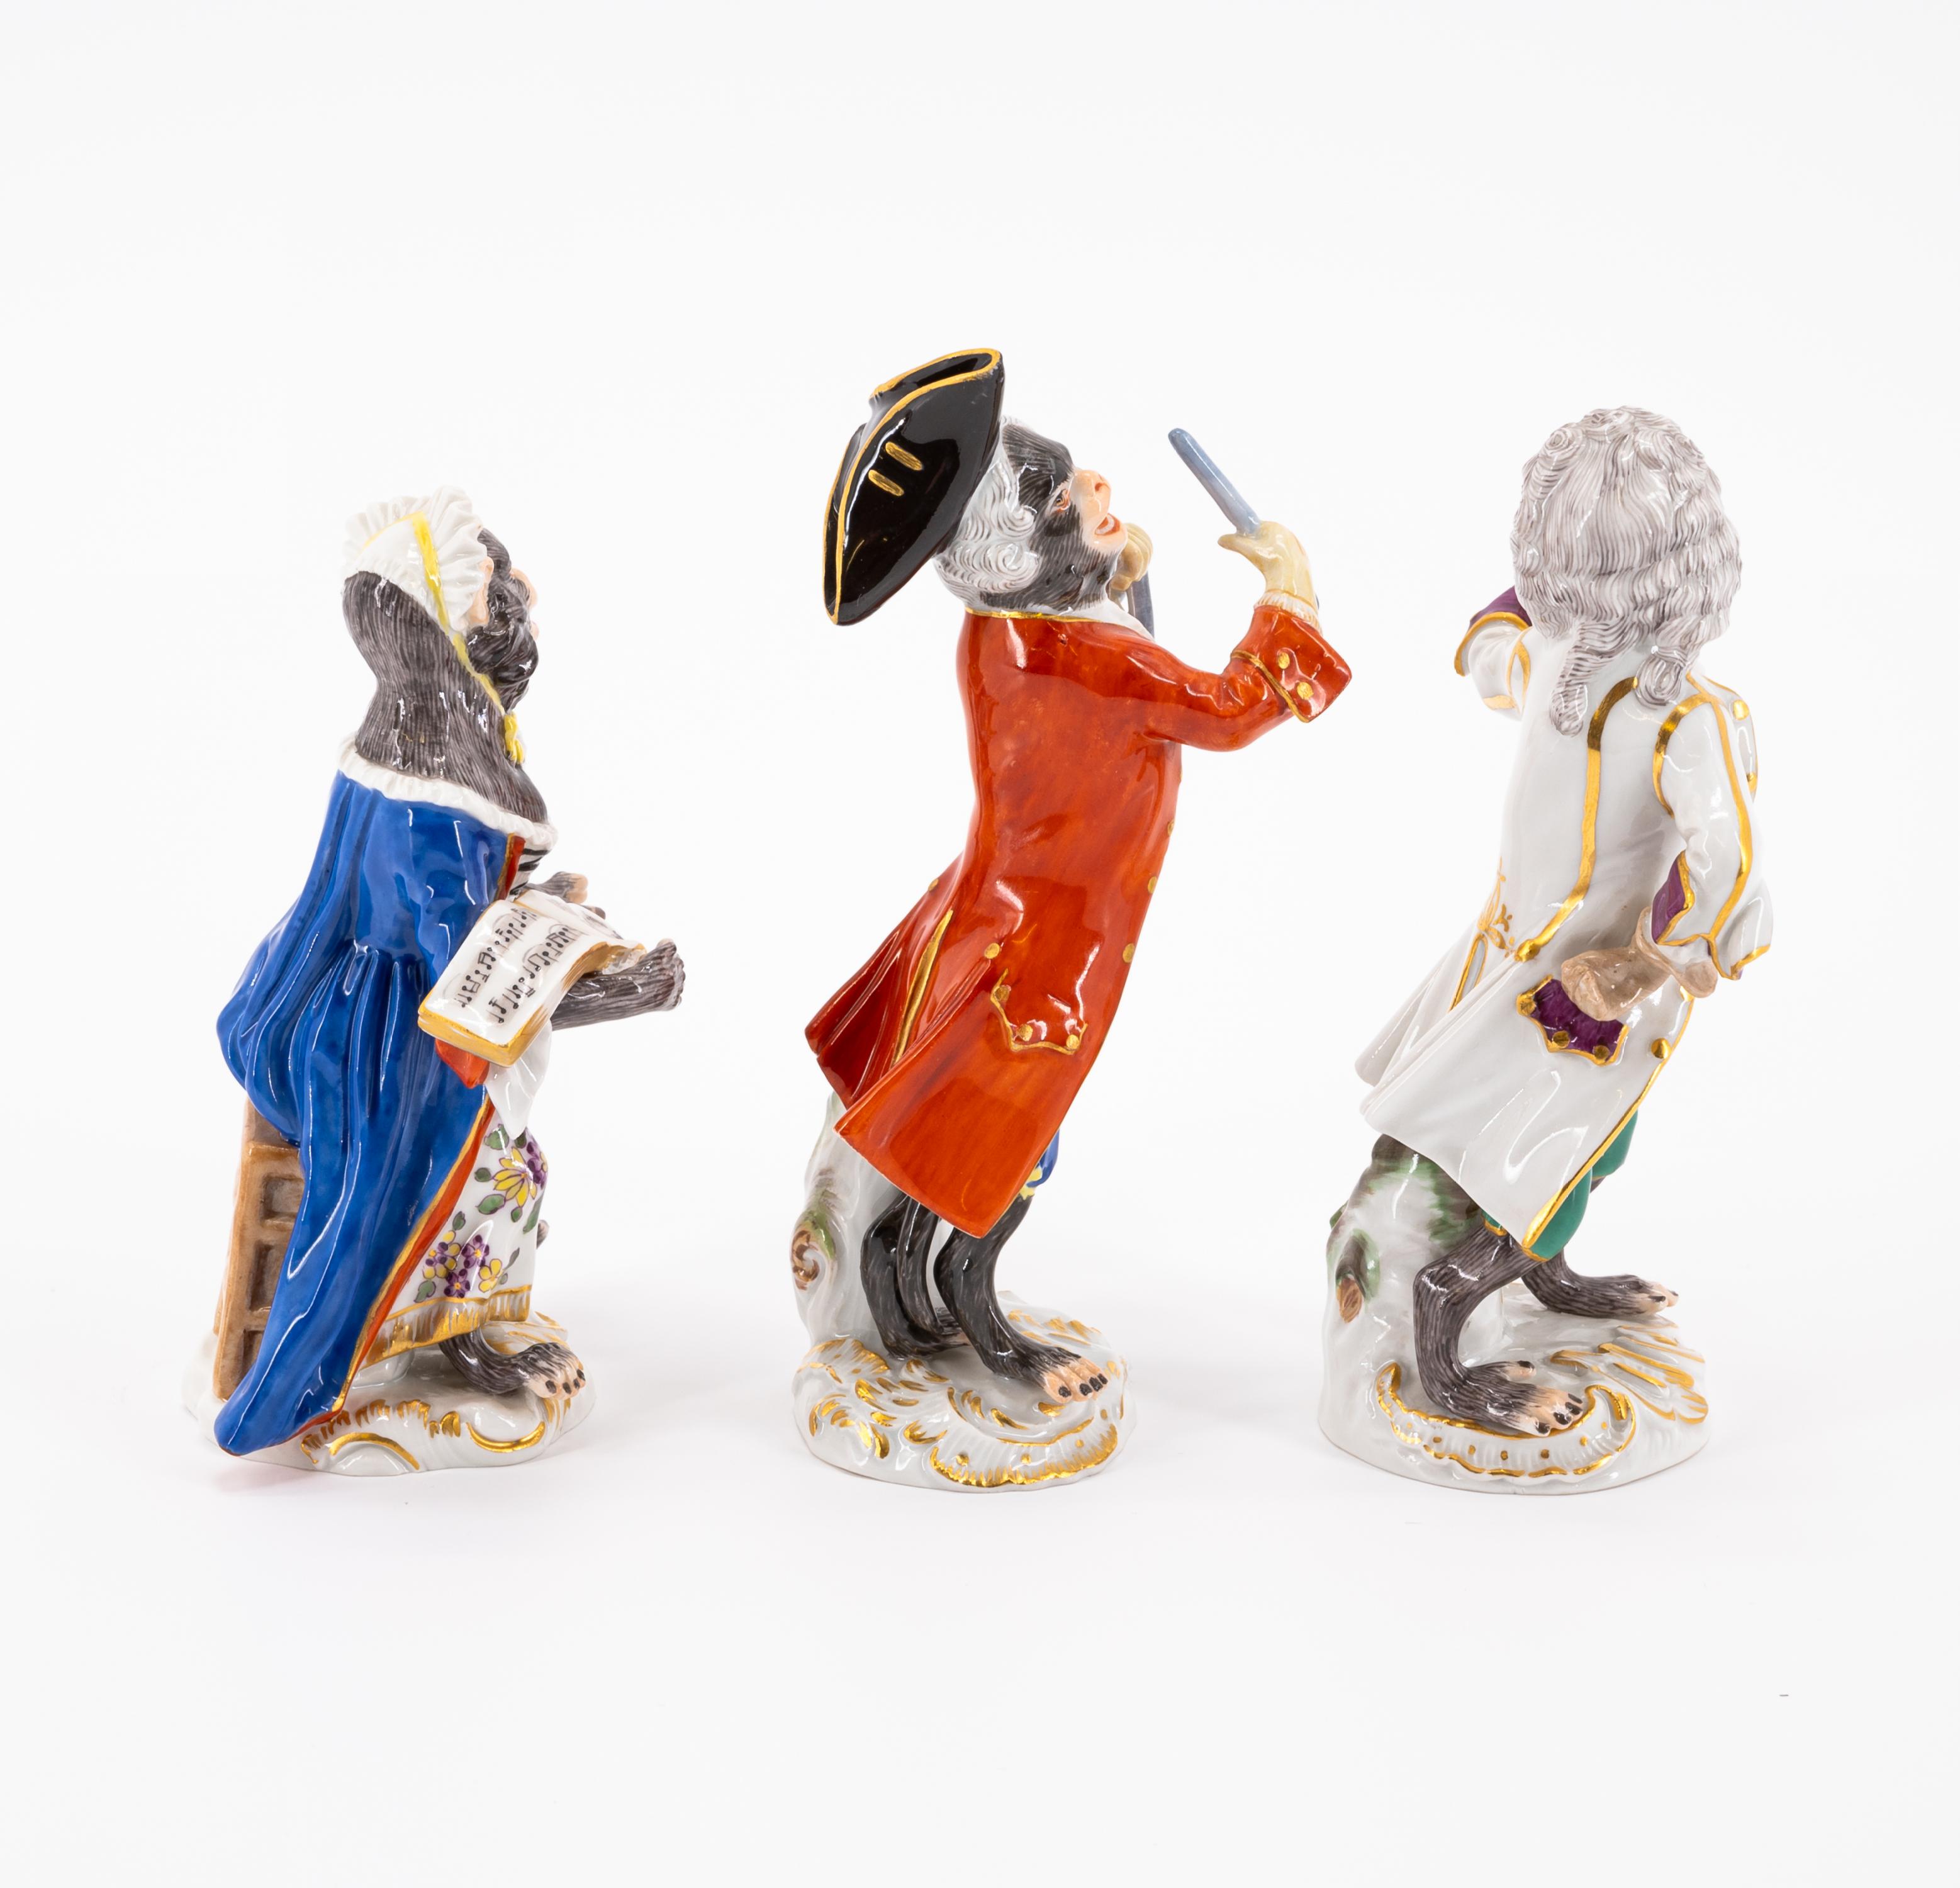 21 PORCELAIN FIGURES FROM THE MONKEY CHAPEL - Image 5 of 27